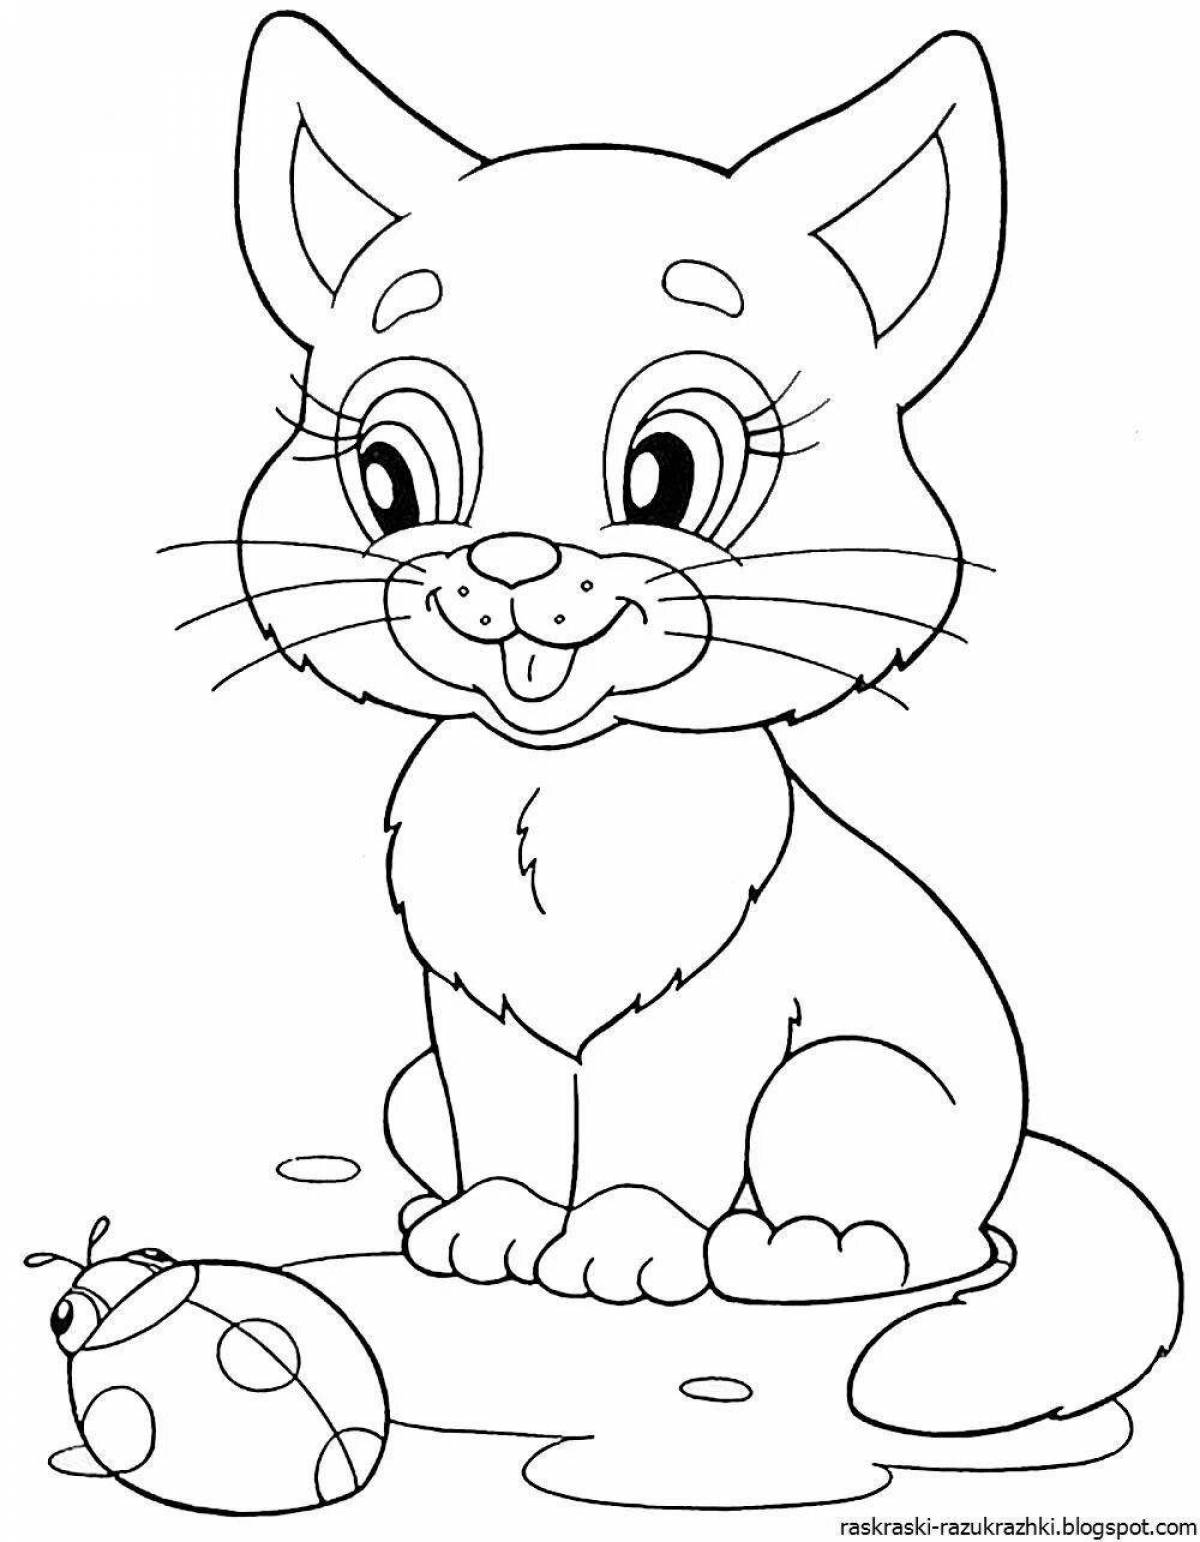 Coloring book inquisitive kitten for children 2-3 years old